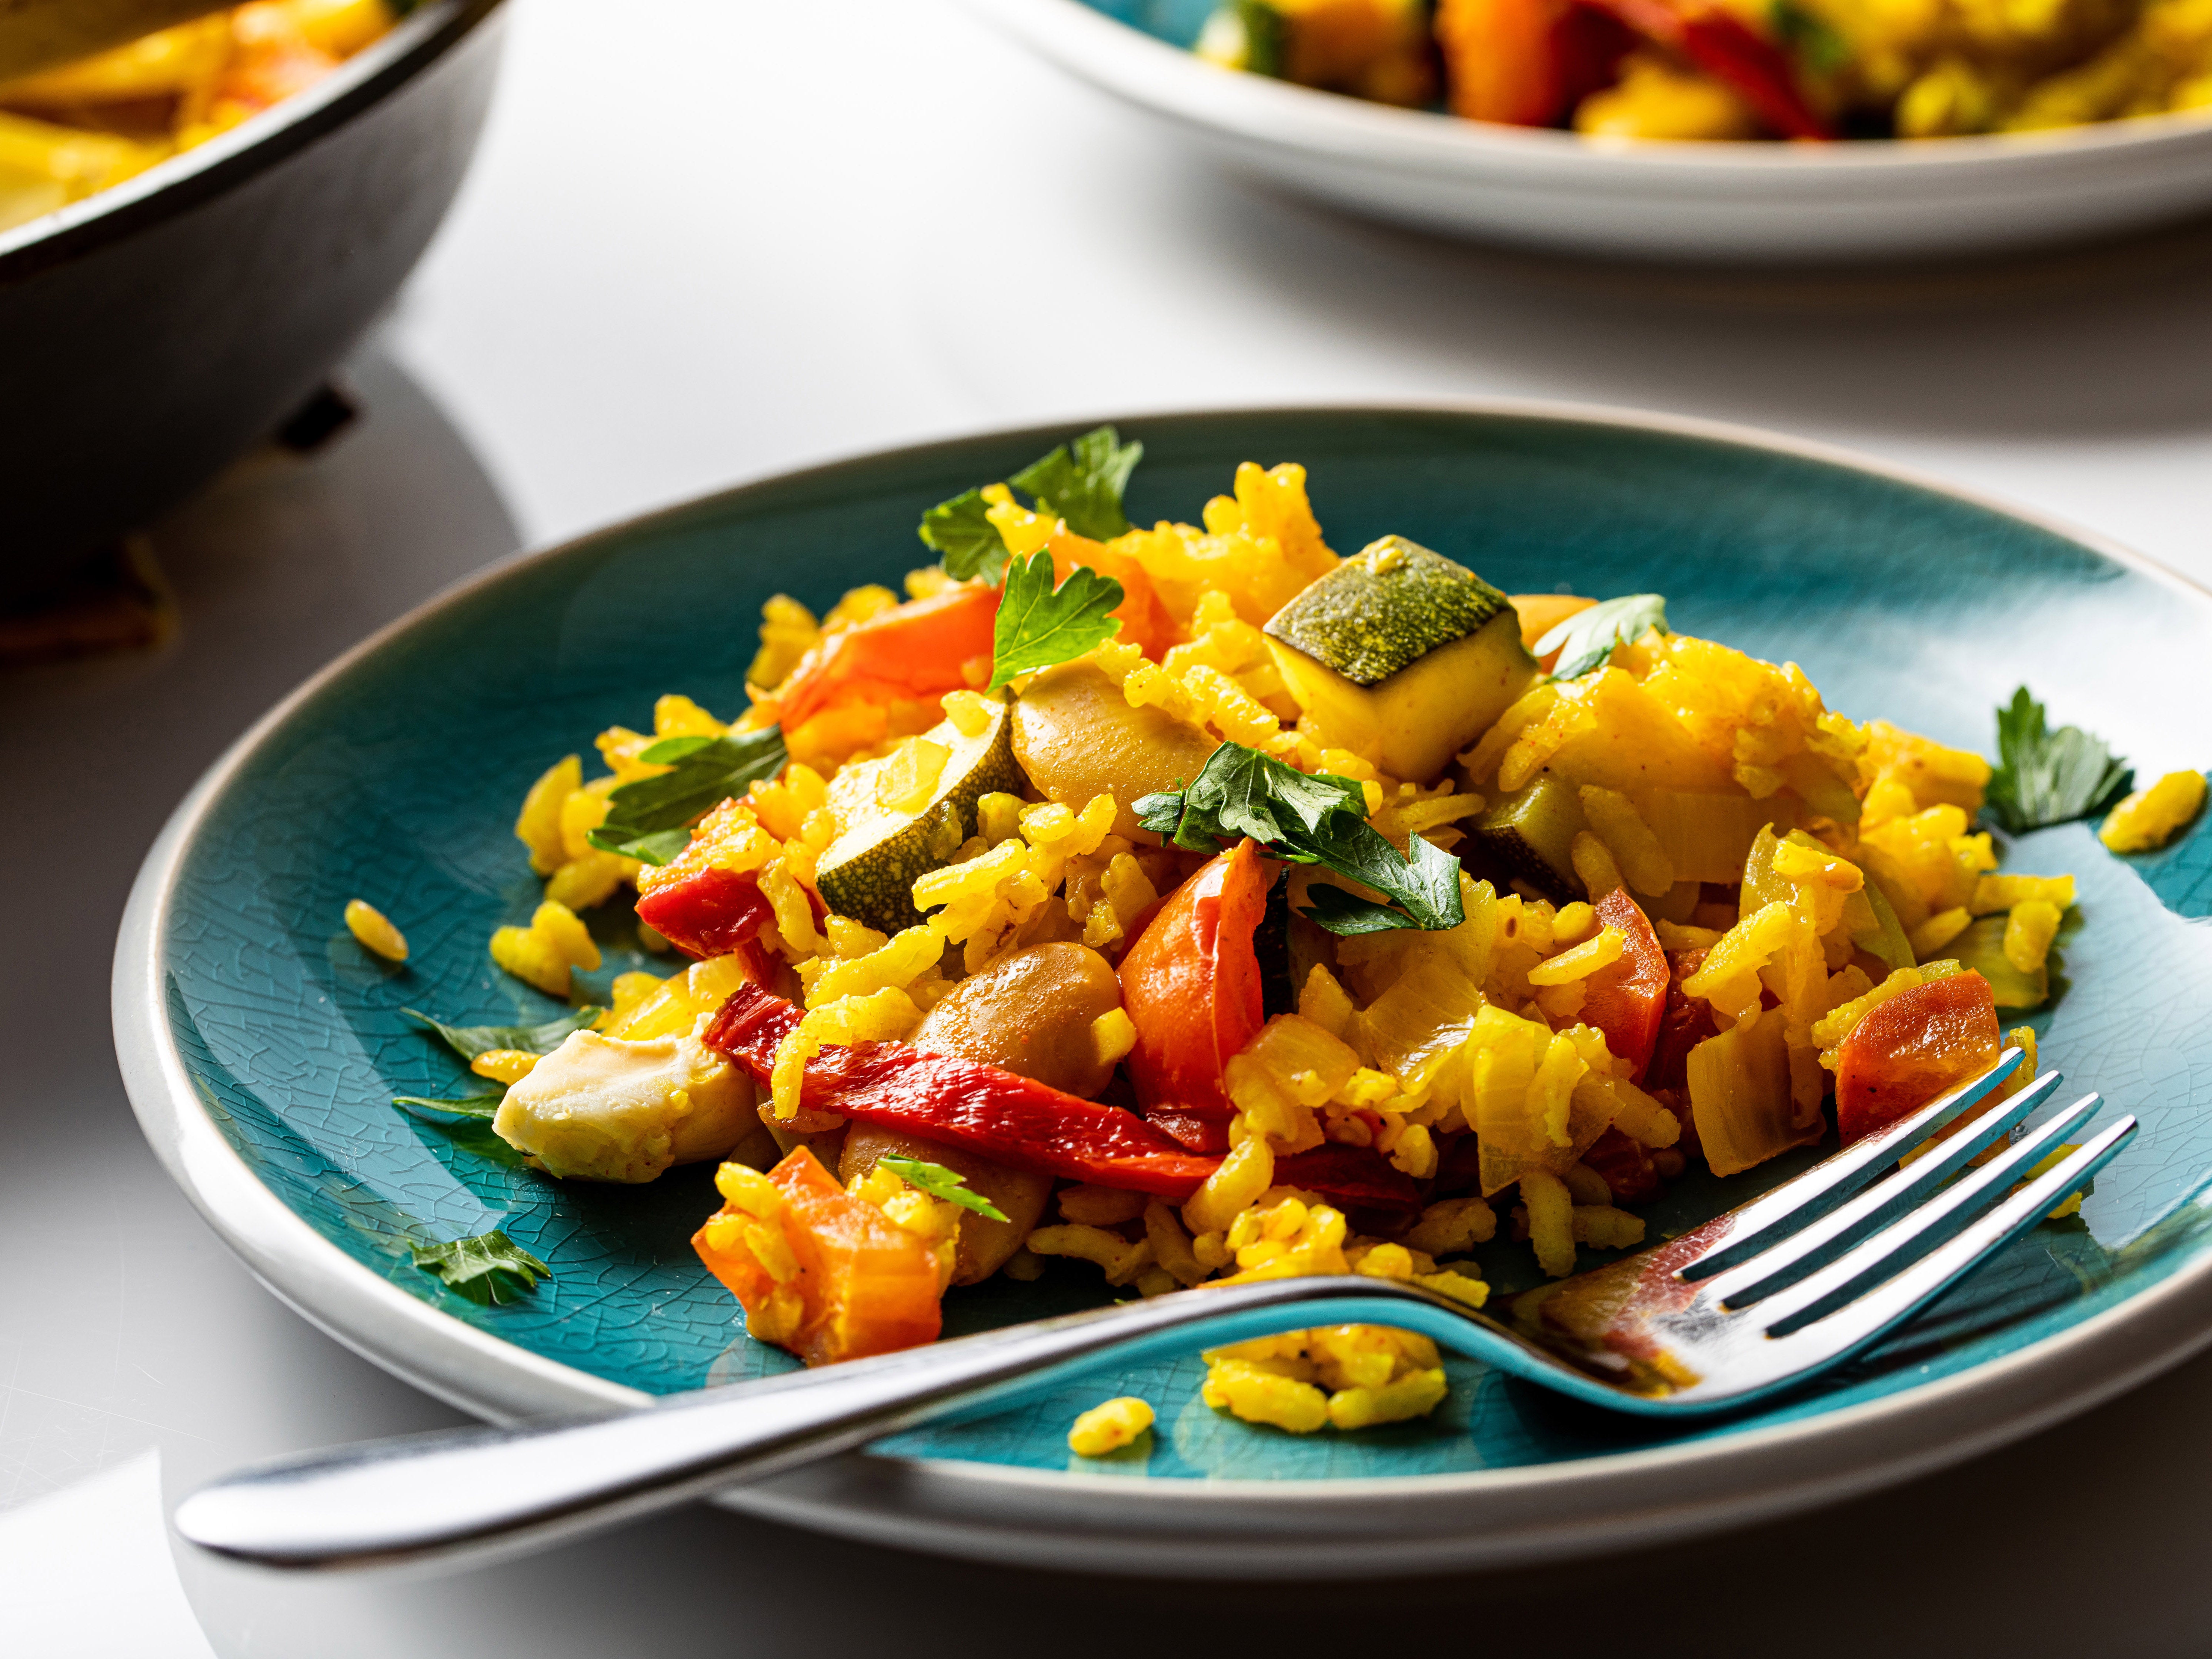 Paella is showy, versatile and feels like a celebration every time